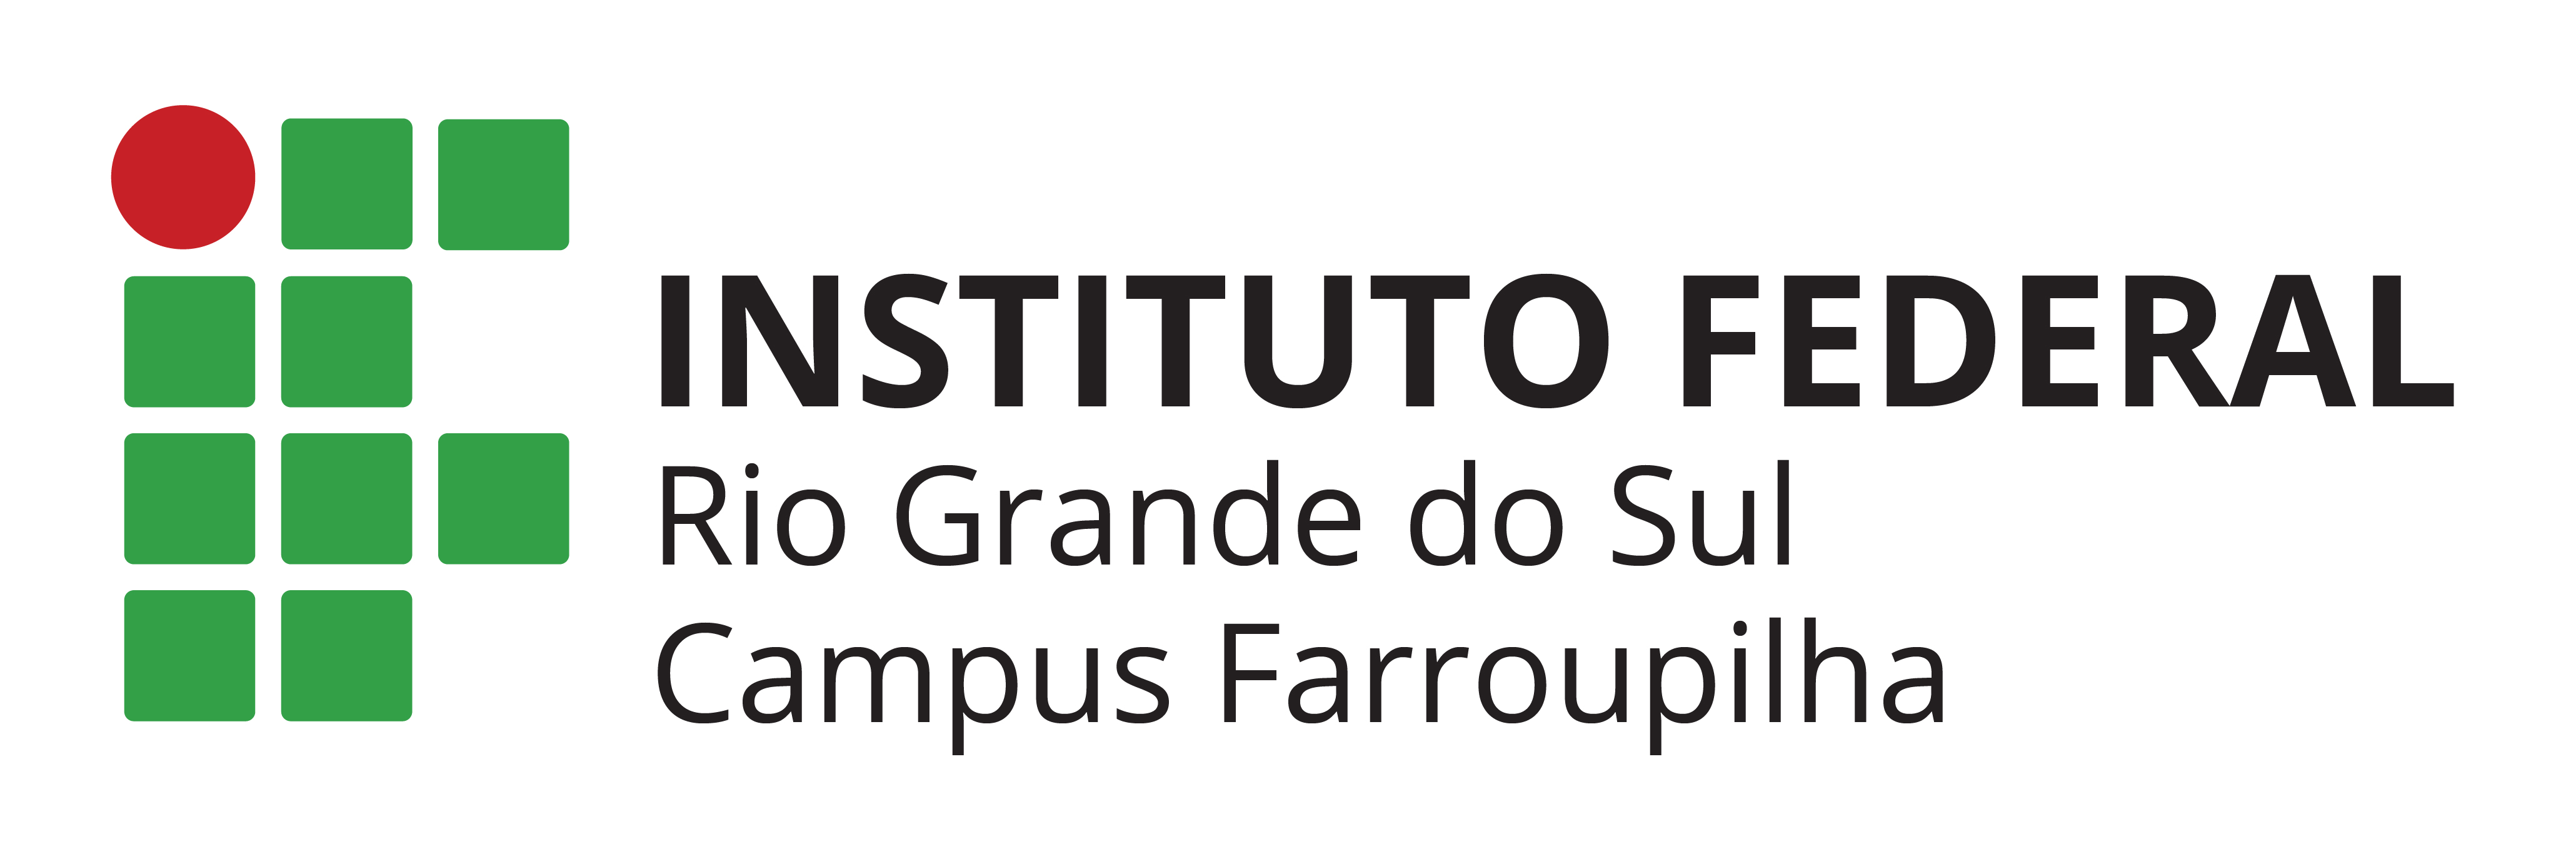 Moodle do IFRS - campus Farroupilha